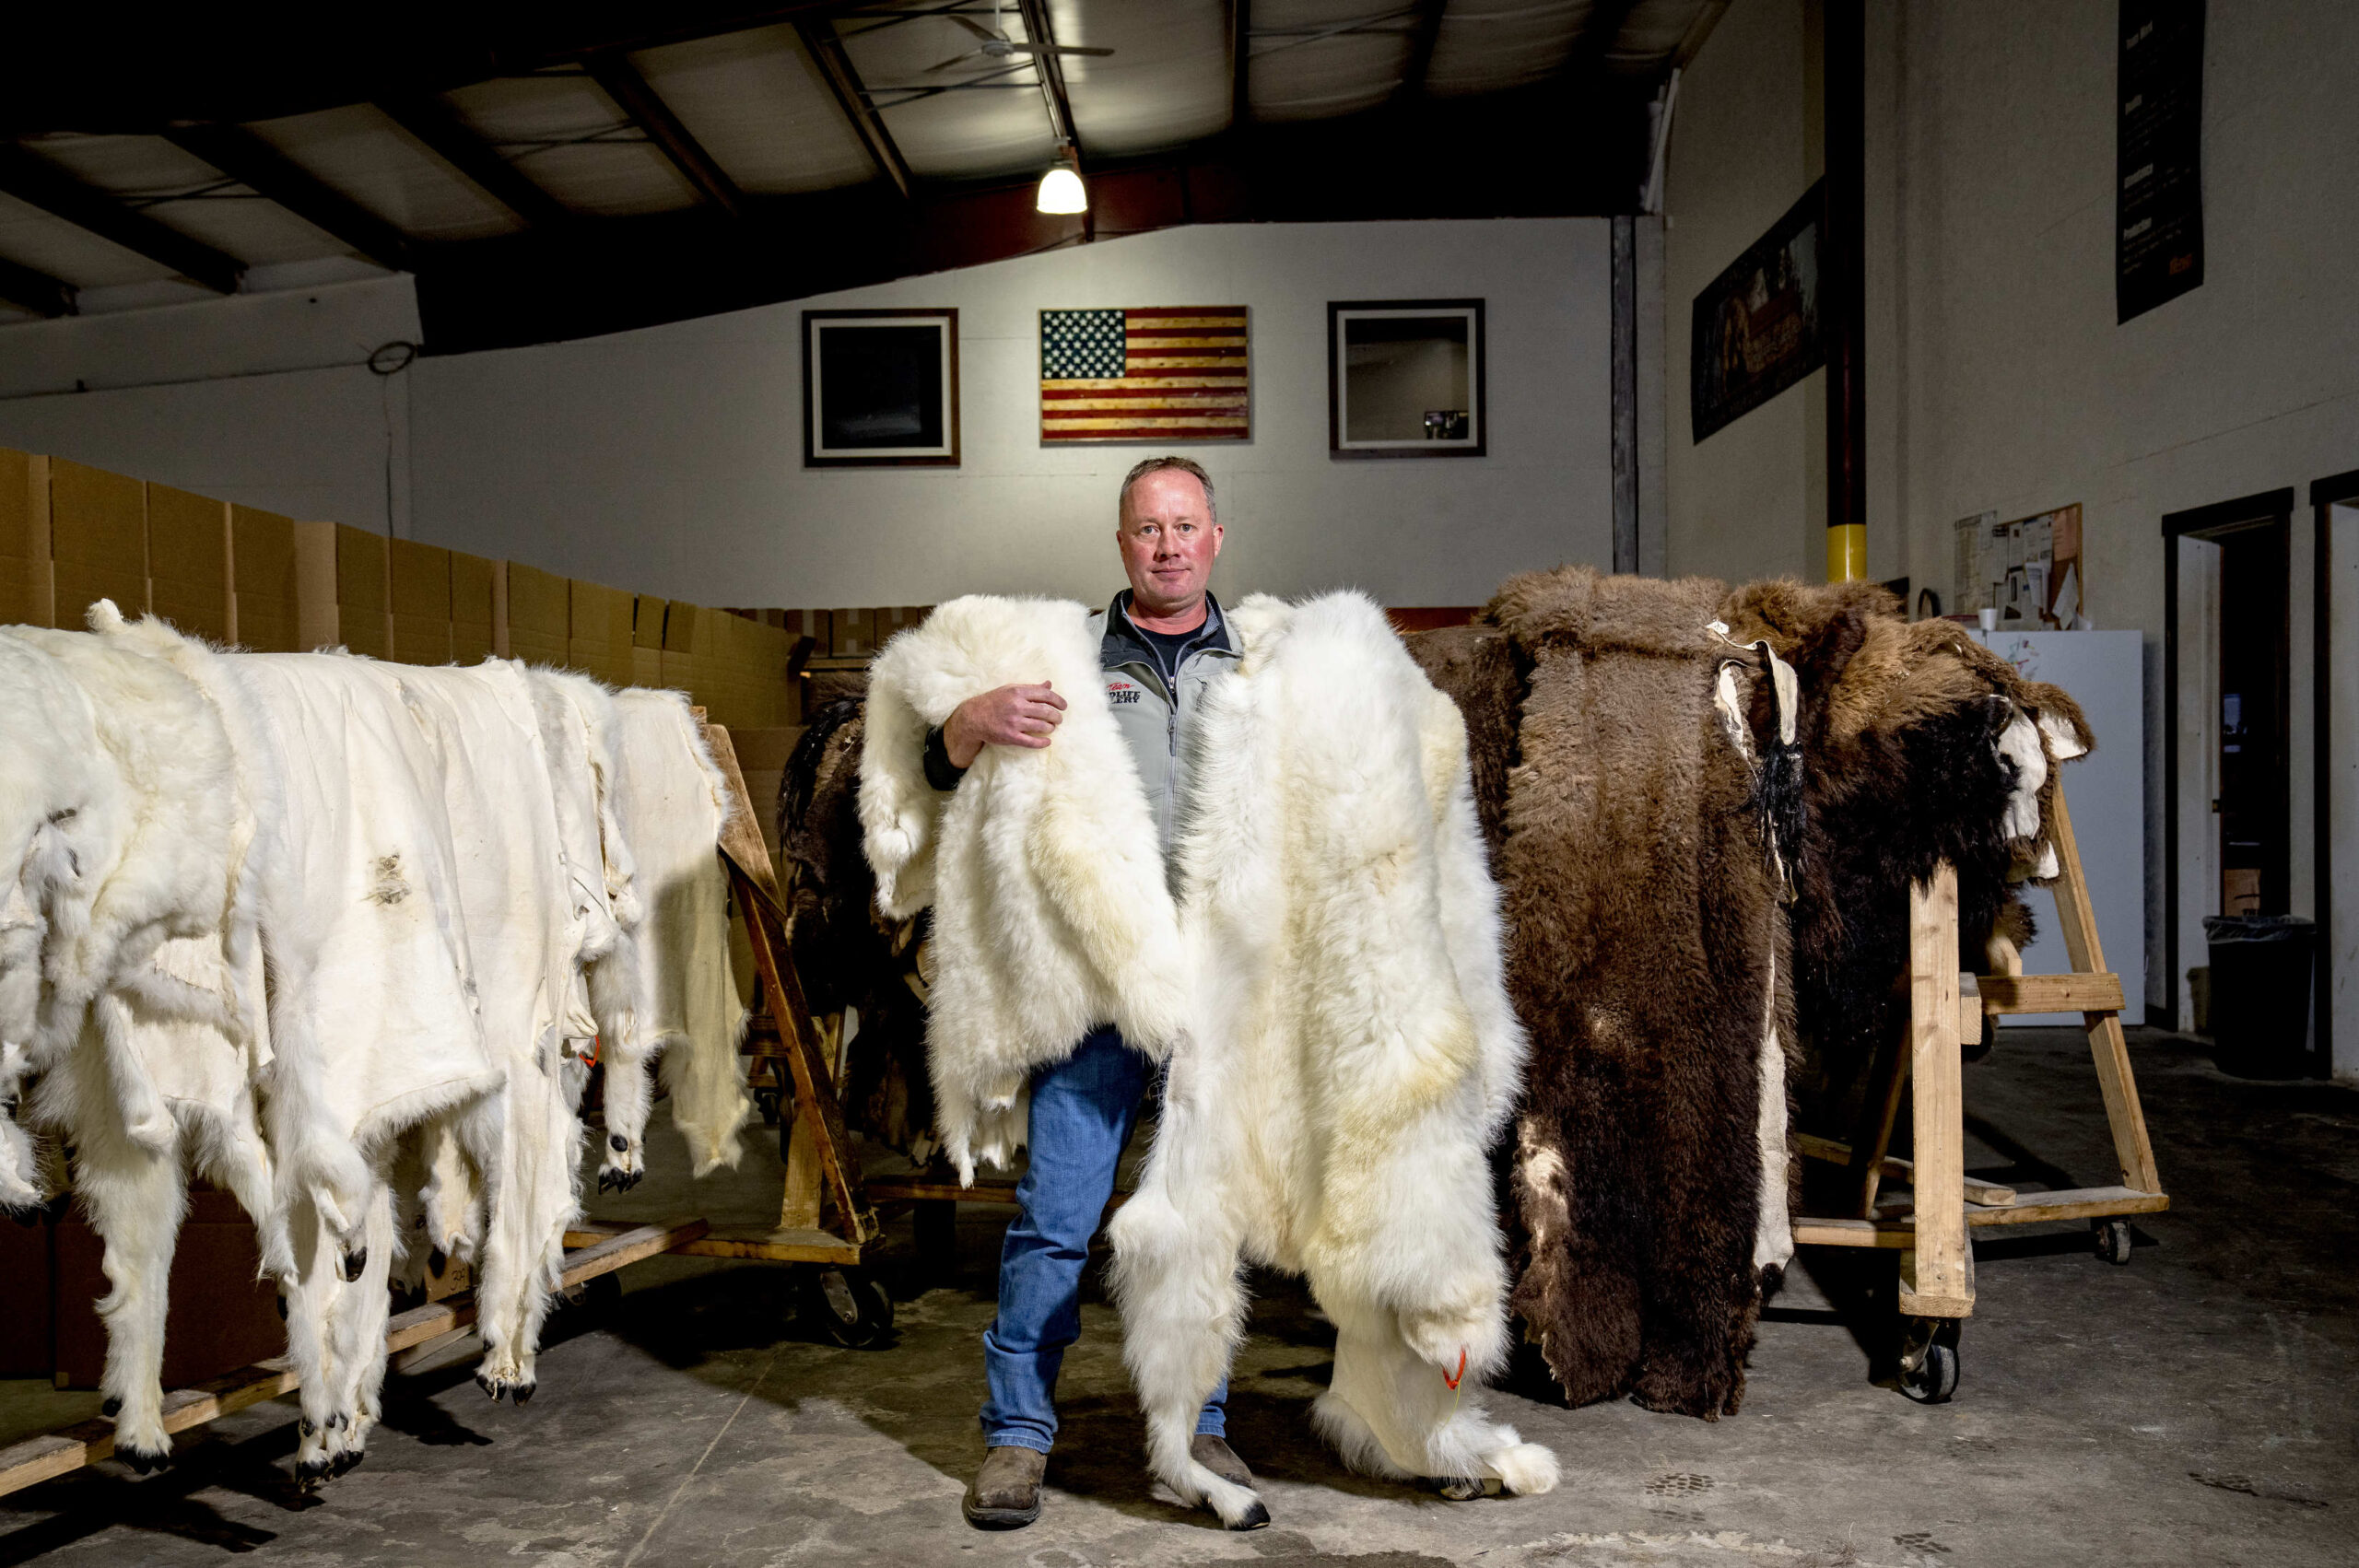 Wildlife Gallery vice president with sheep hides.